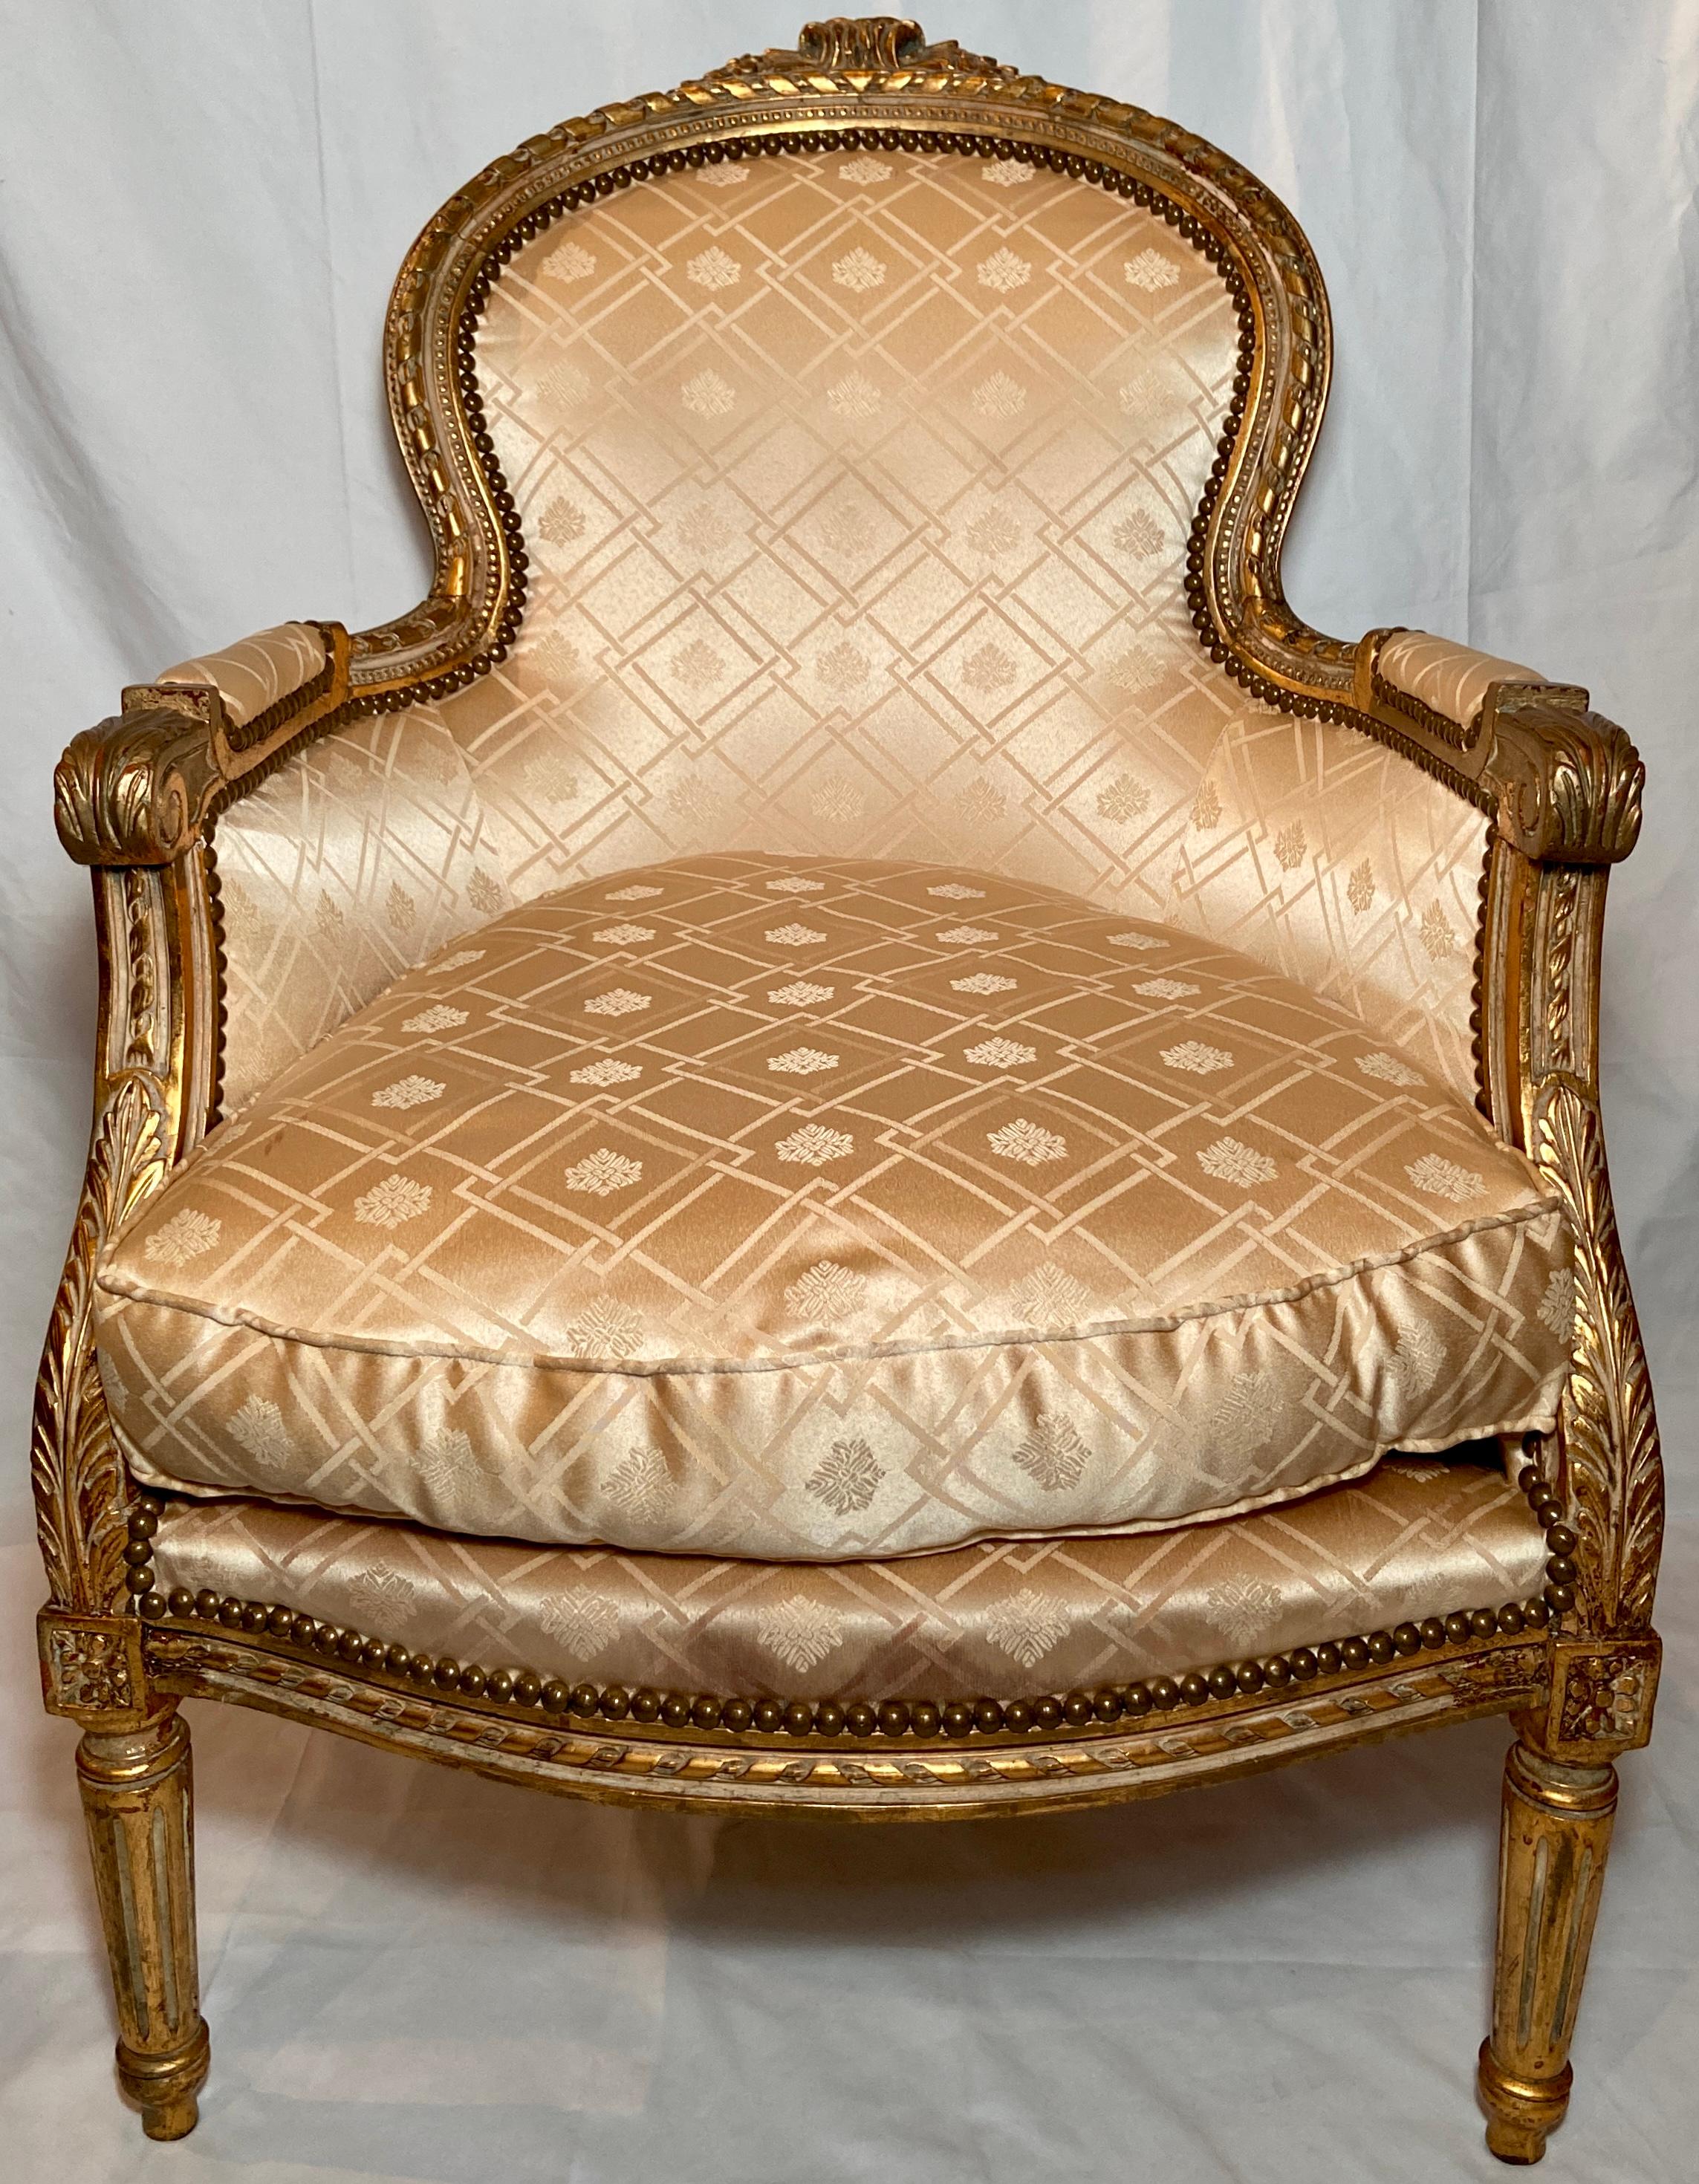 Pair antique French cream-colored silk upholstered carved giltwood arm-chairs, Circa 1890-1910.